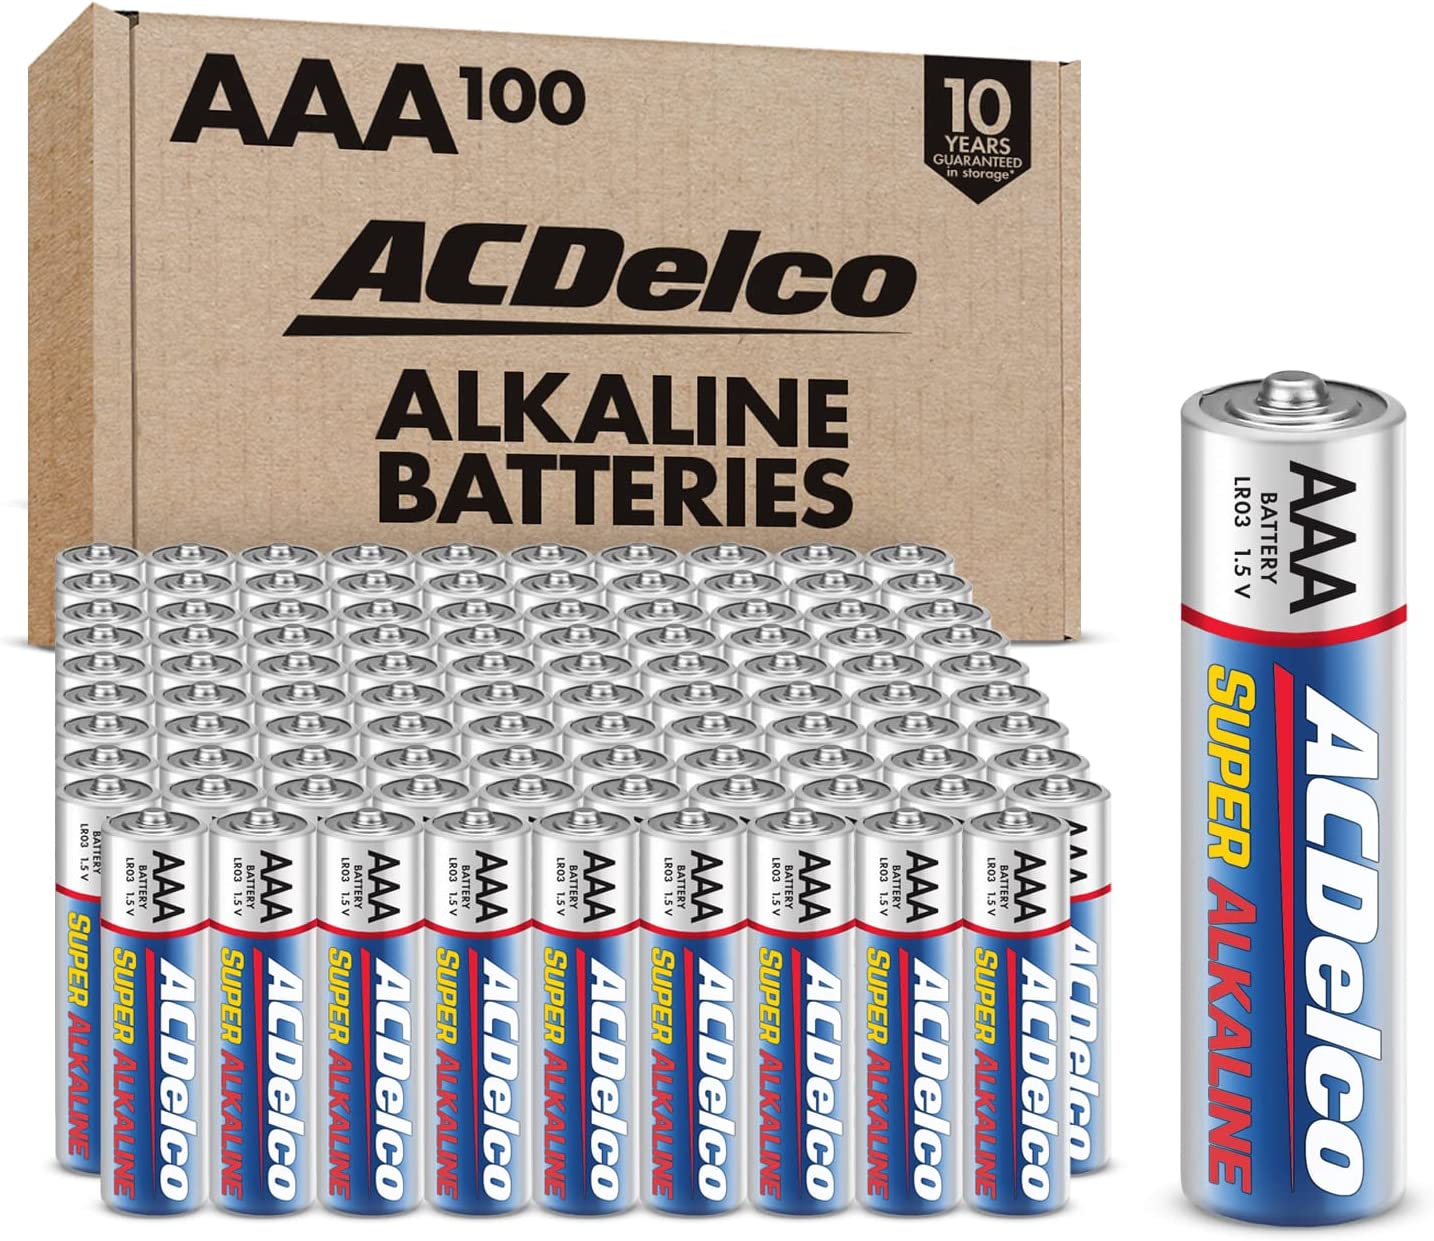 ACDelco Maximum Remote Control Alkaline AAA Batteries, 100-Count